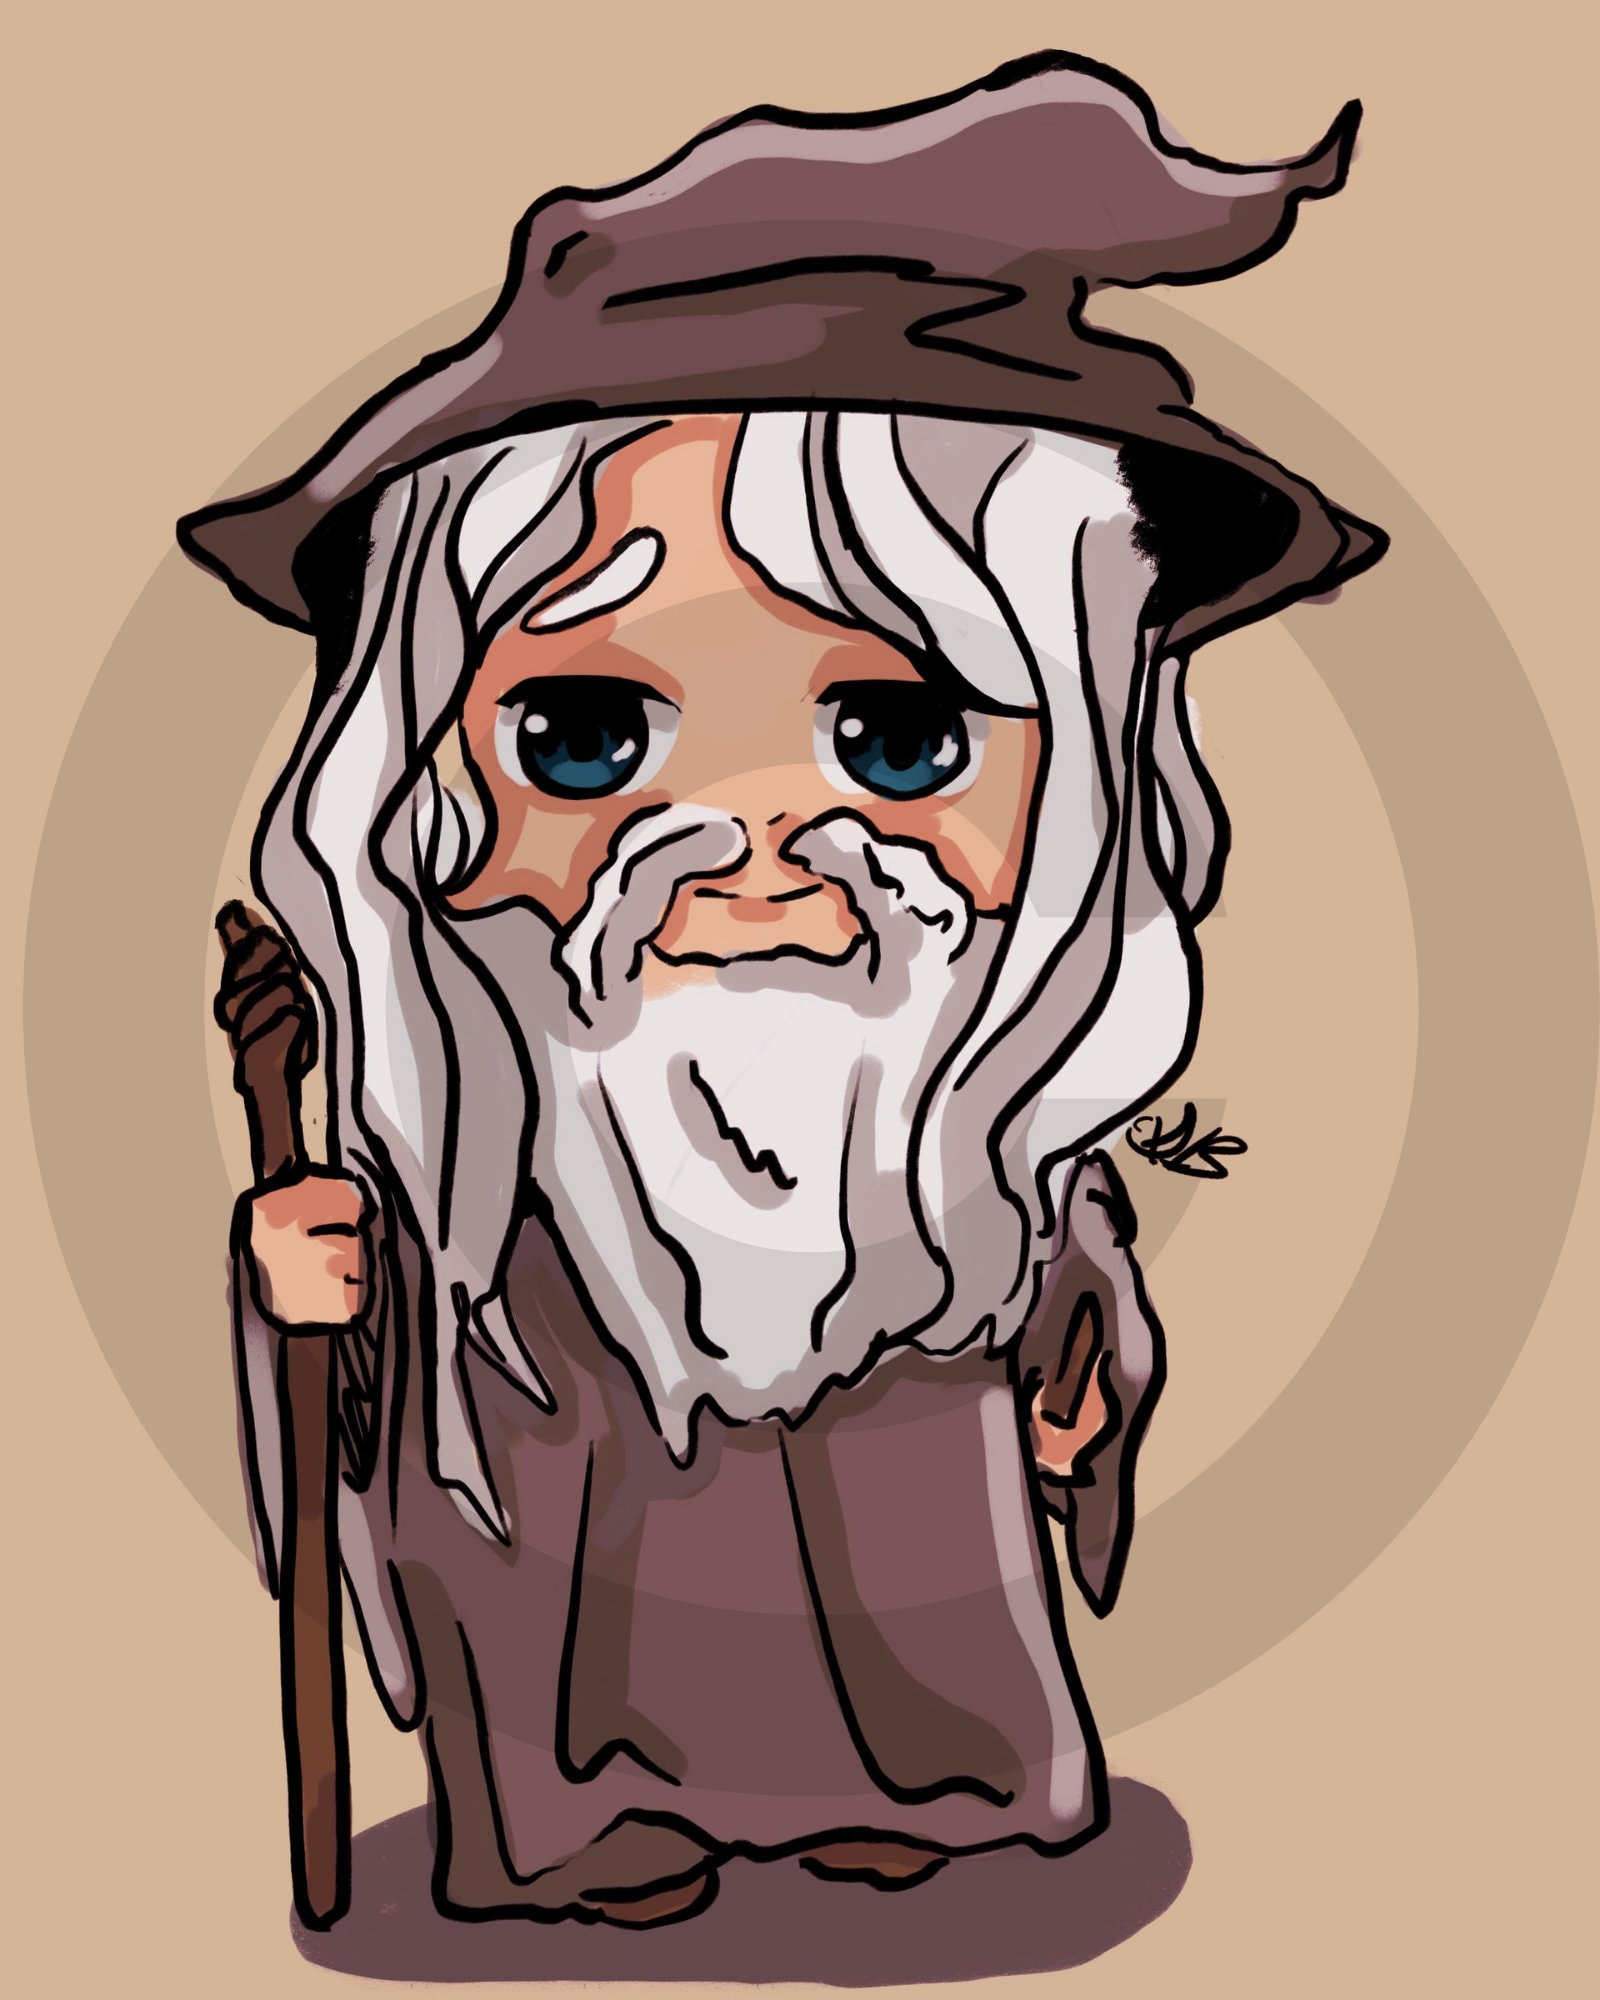 Gandalf Clipart Of Flowers